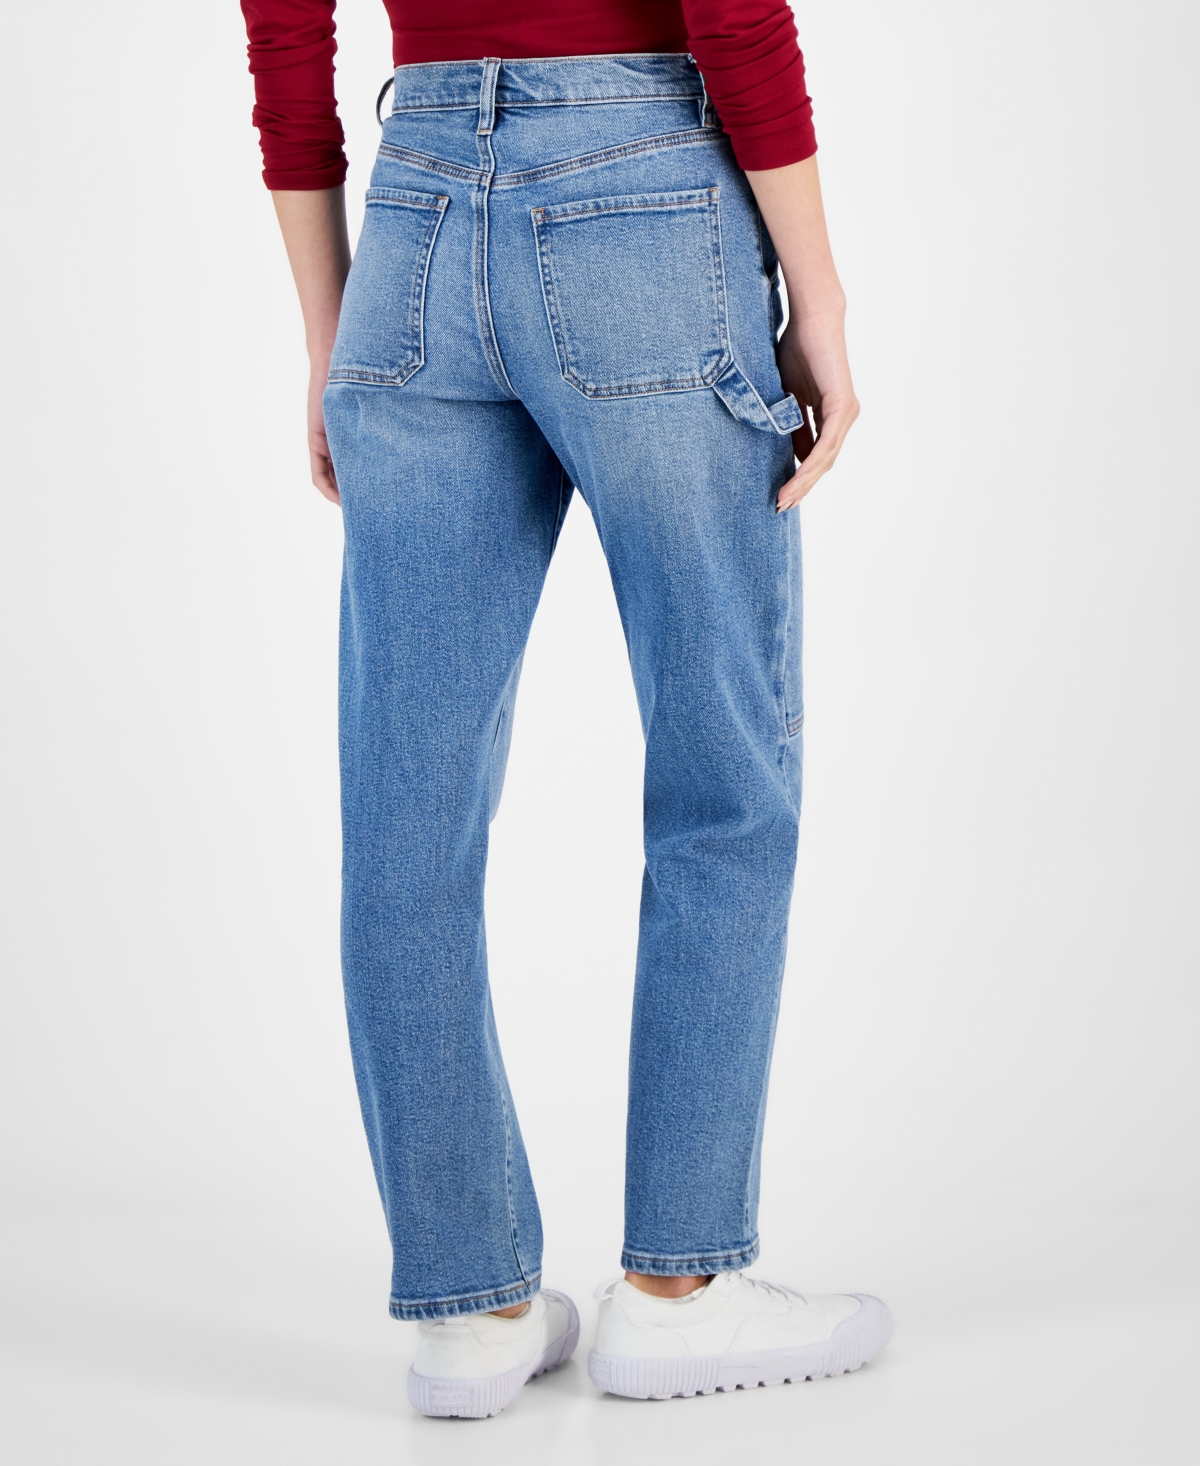 Shop And Now This Women's Utility Straight Leg Jeans In Medium Wash